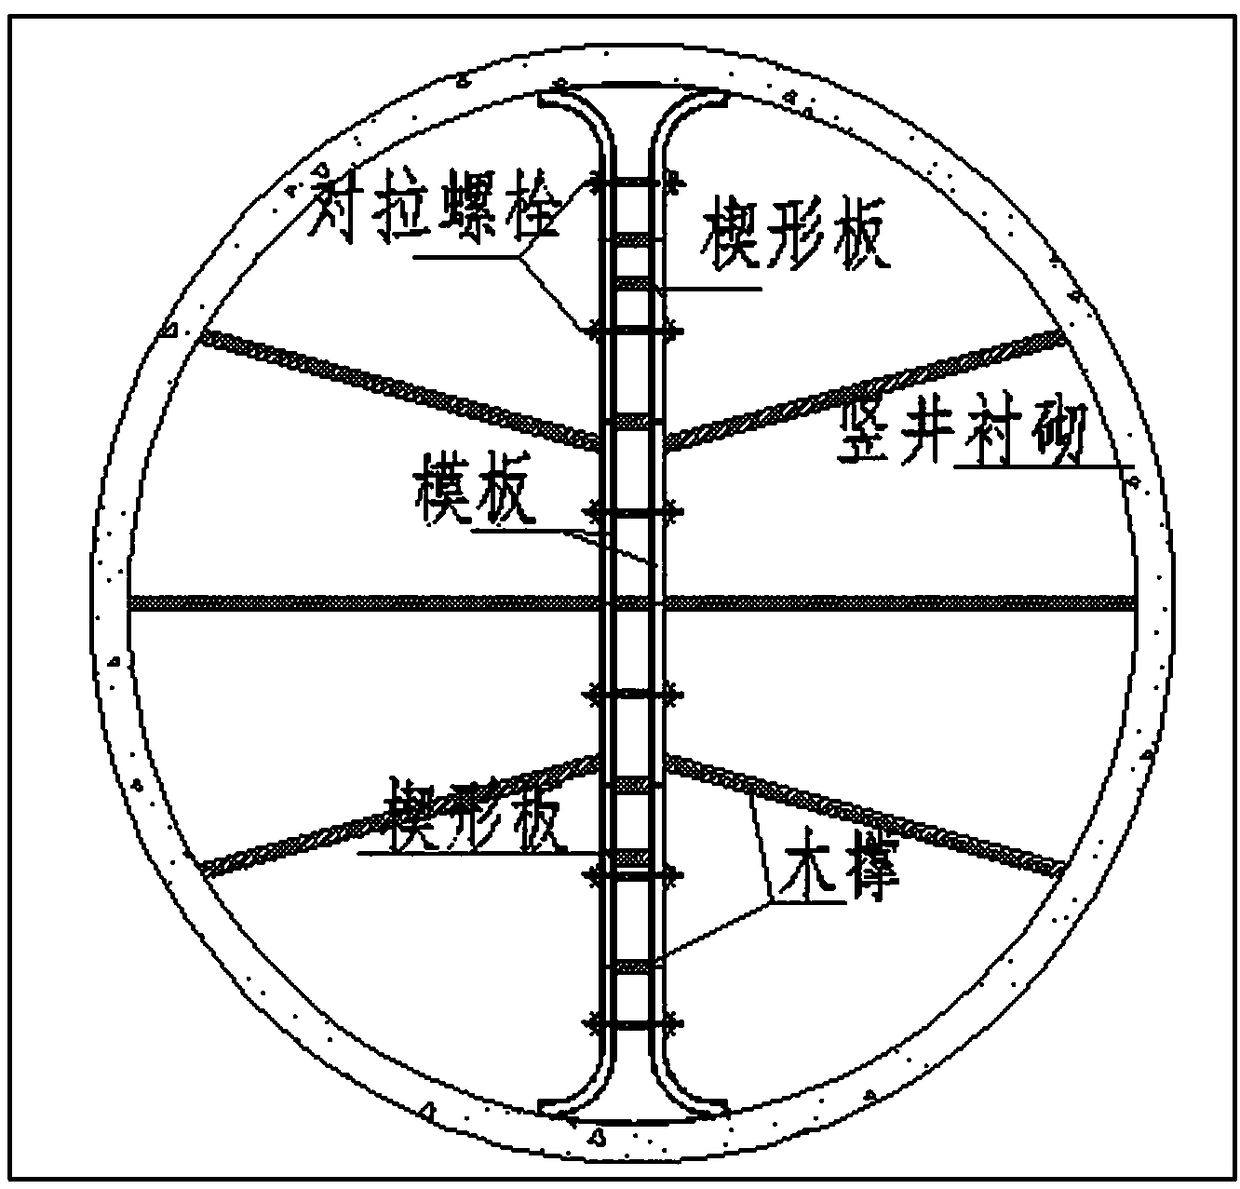 Tunnel ventilation vertical shaft wellbore construction device and method